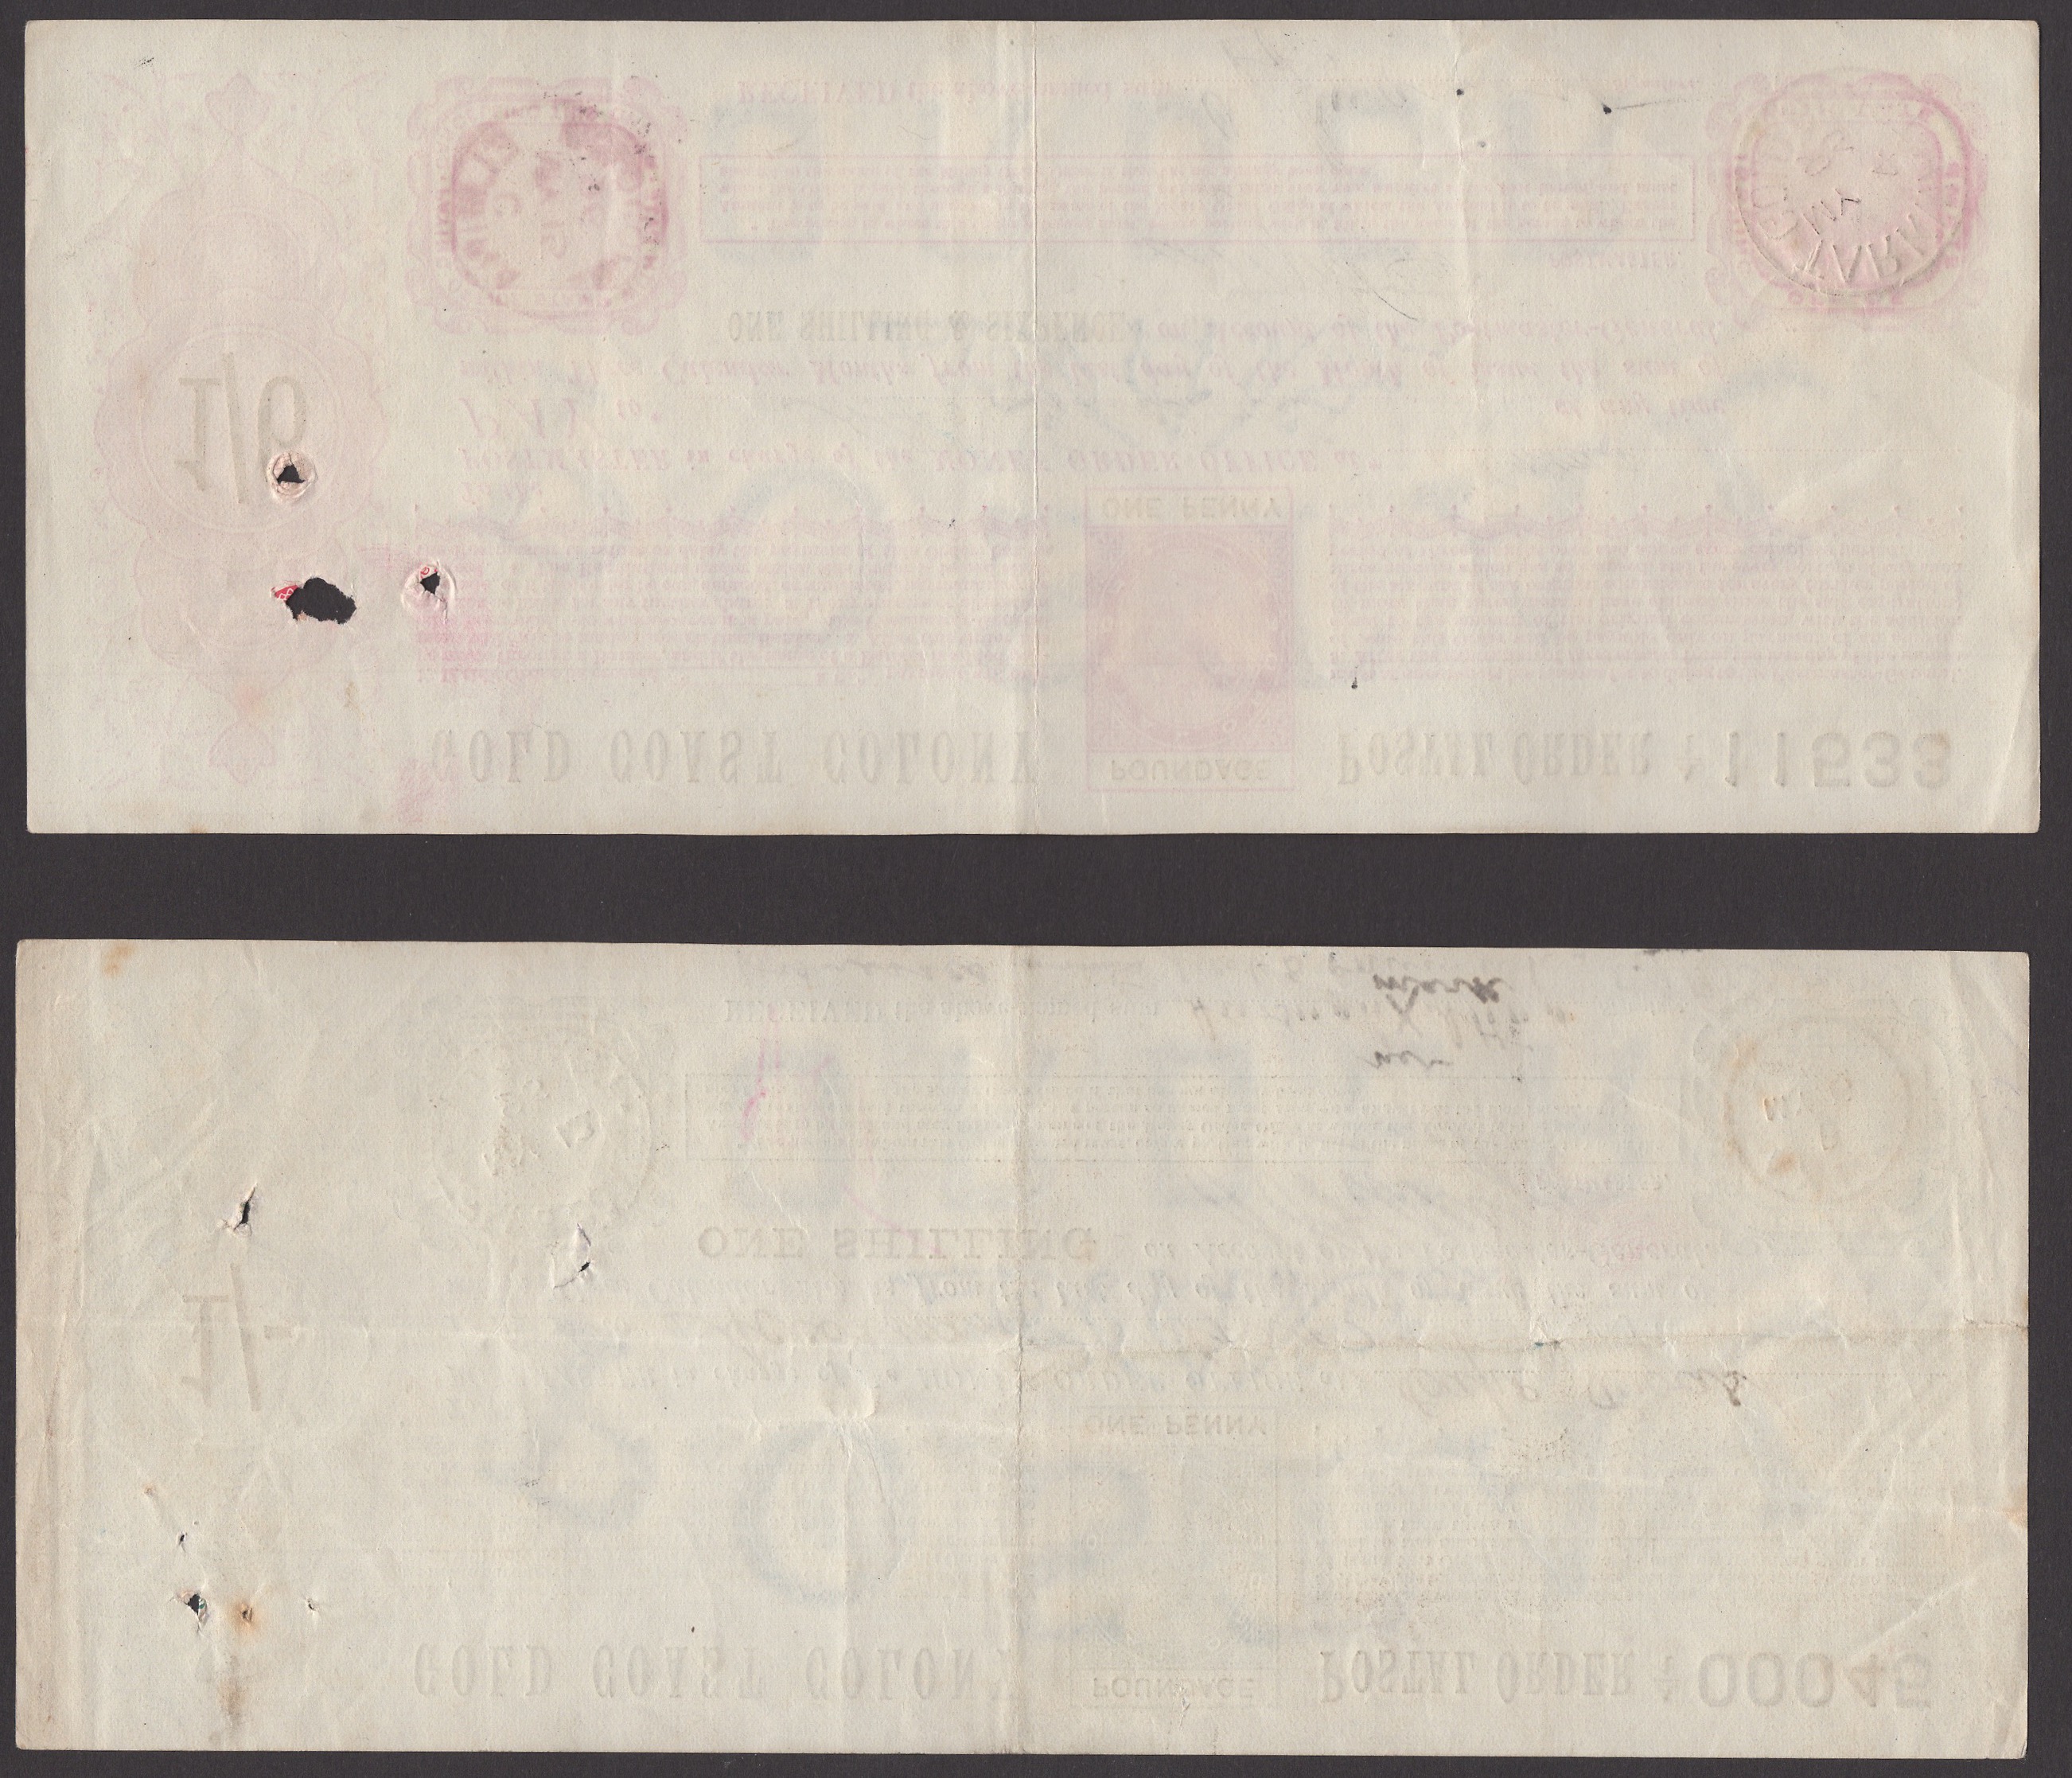 Gold Coast Colony (now Ghana), Postal Orders, a remarkable set of Victorian postal orders... - Image 2 of 6